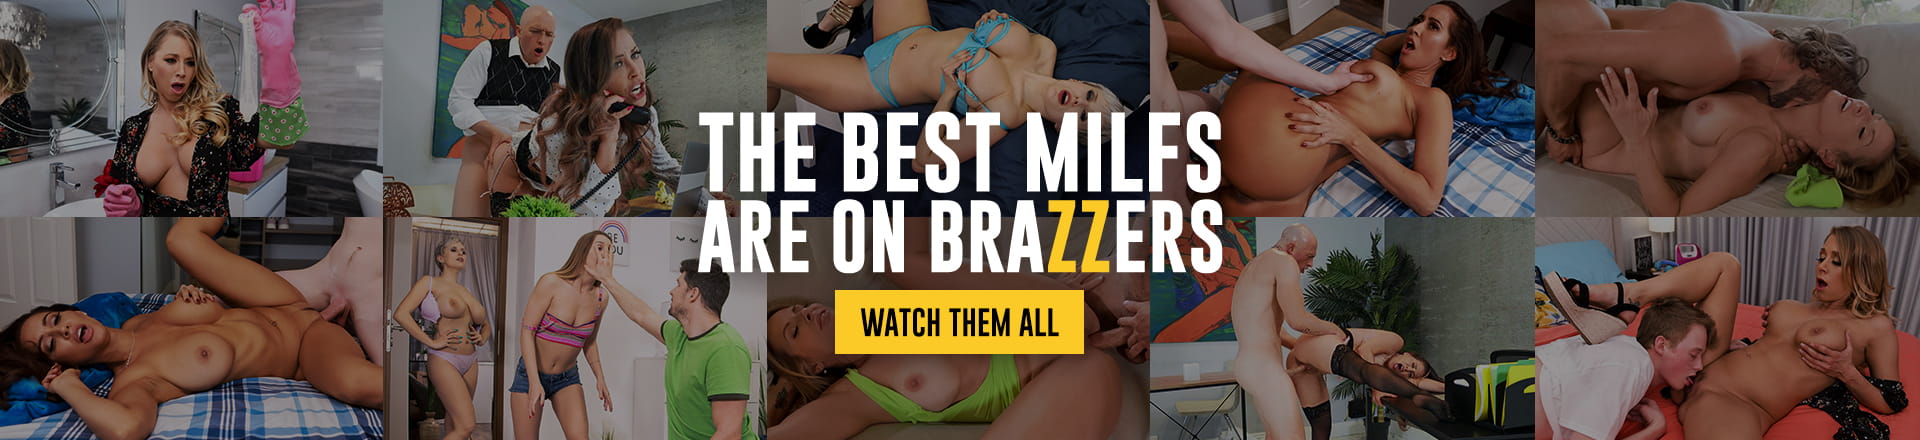 Brazzers Hottest Ads All The Best Porn Ads